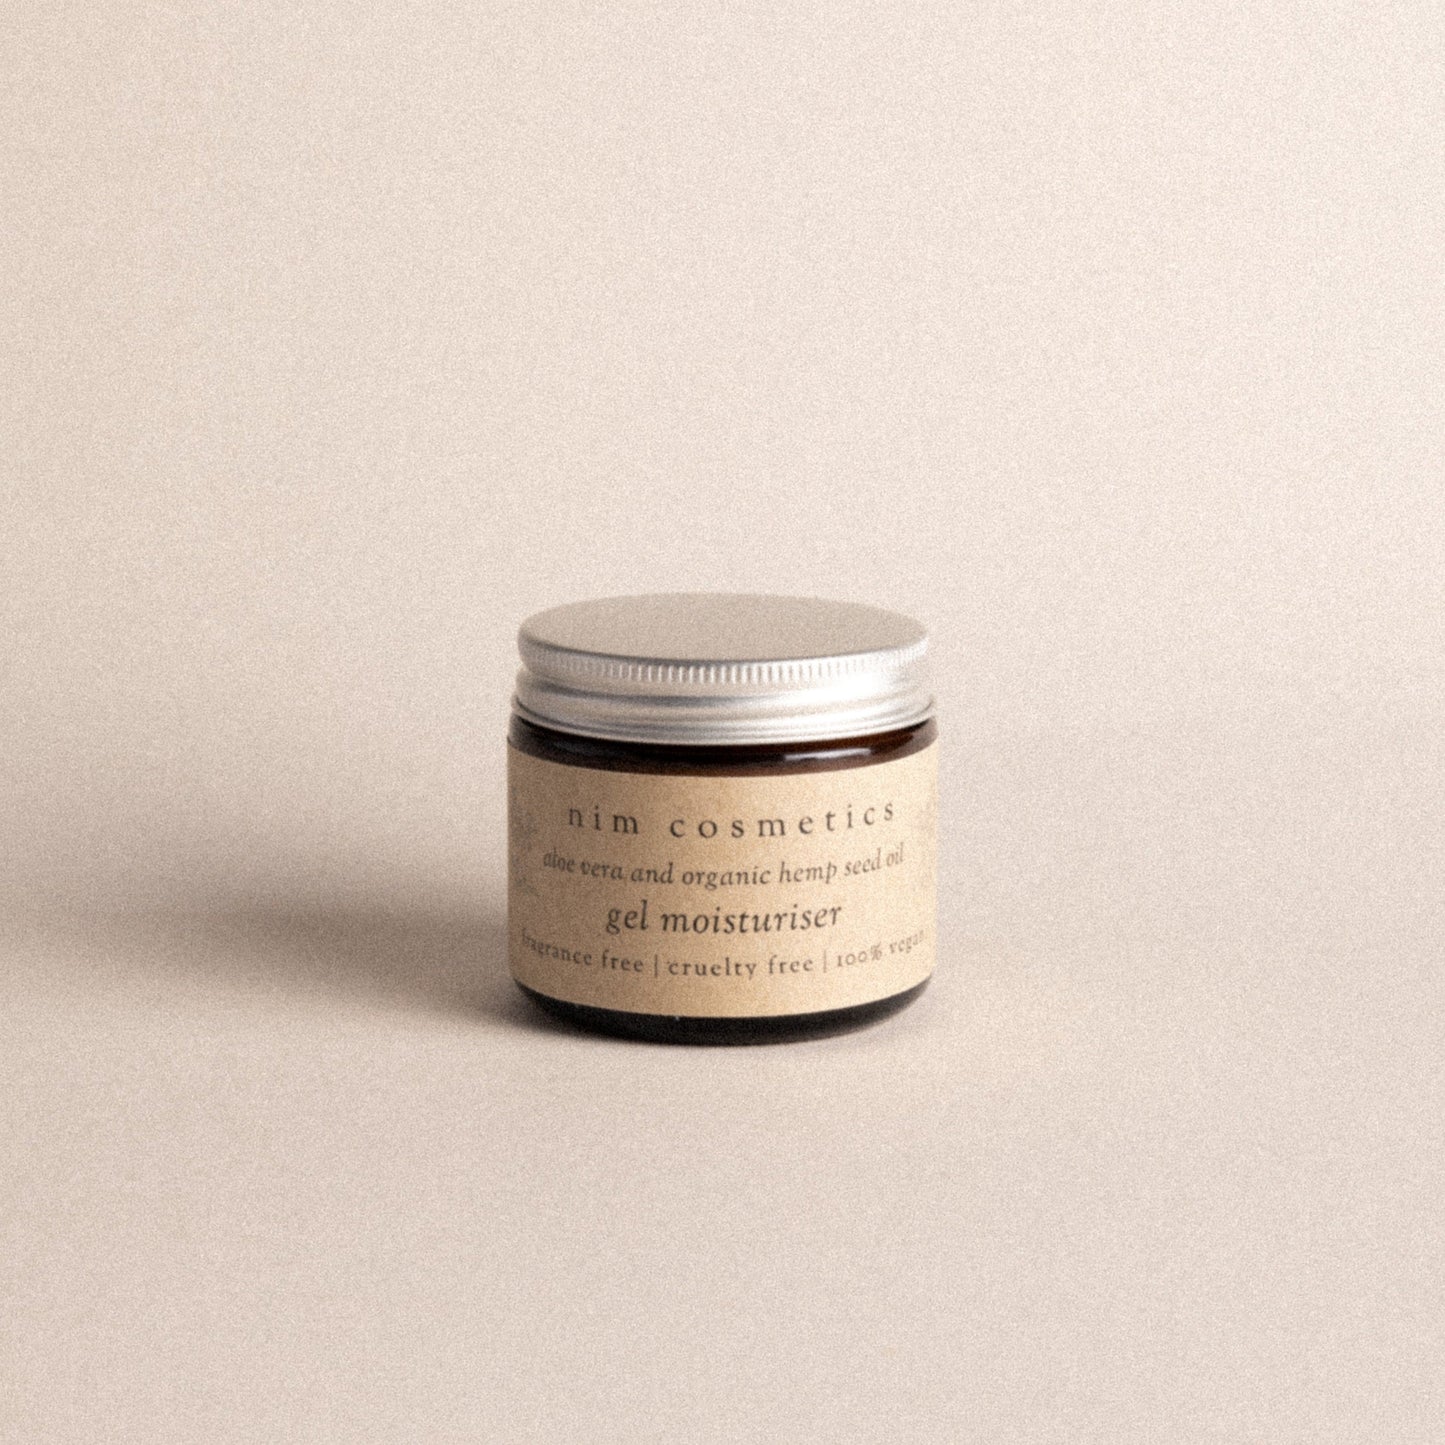 an image of a amber glass jar with a silver lid, with a label that reads - Nim Cosmetics, Aloe Vera and Organic Hemp Seed Oil Gel Moisturiser